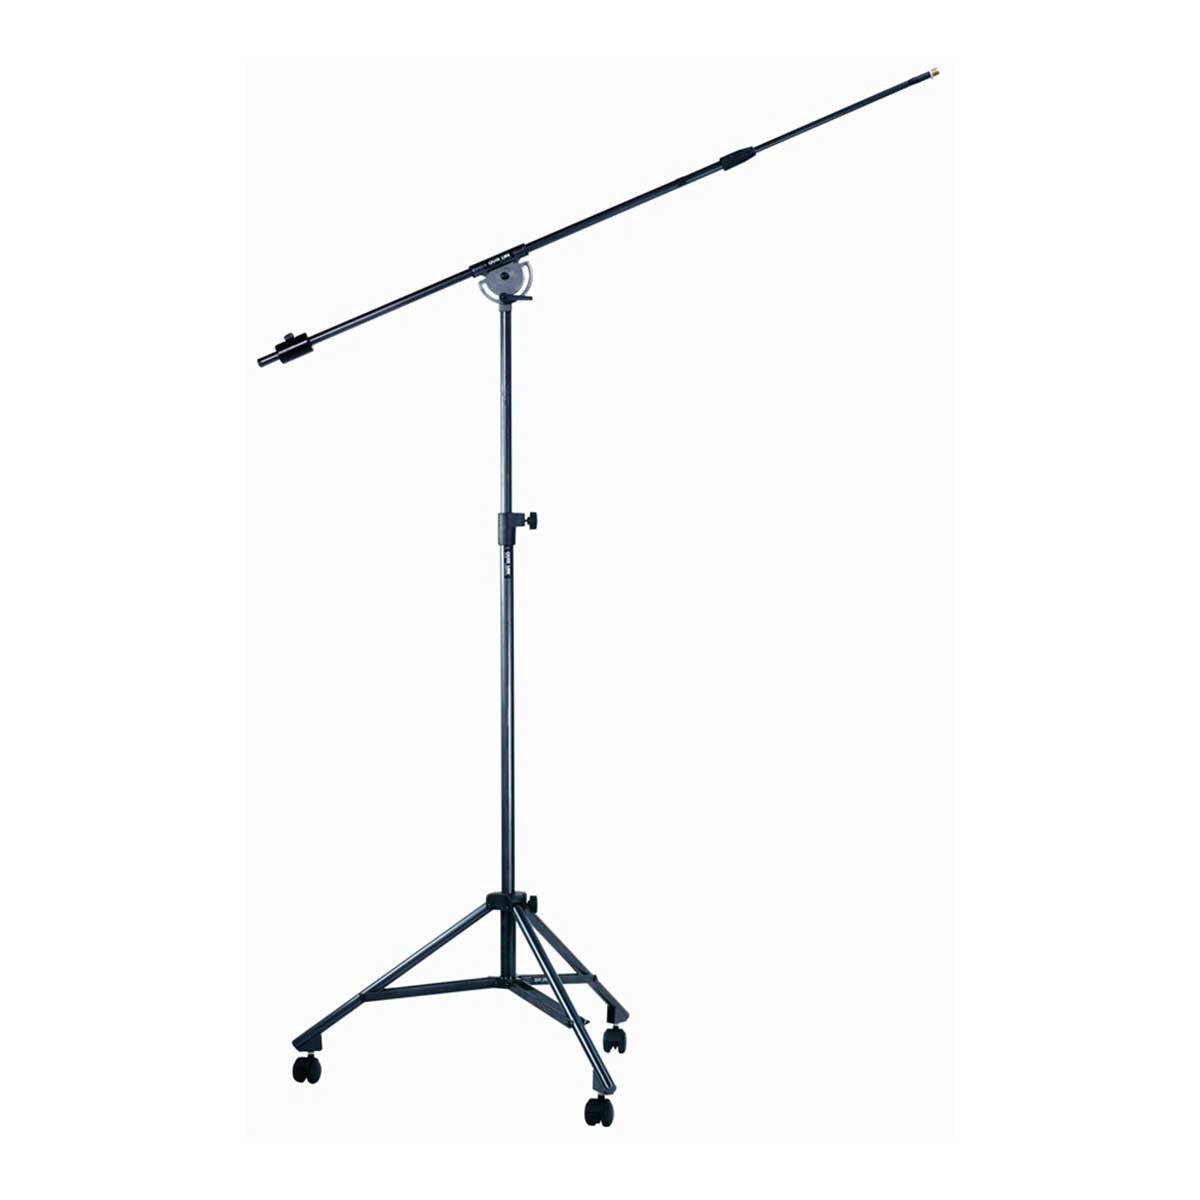 Quicklok A/50 Height-adjustable tripod studio boom stand with casters